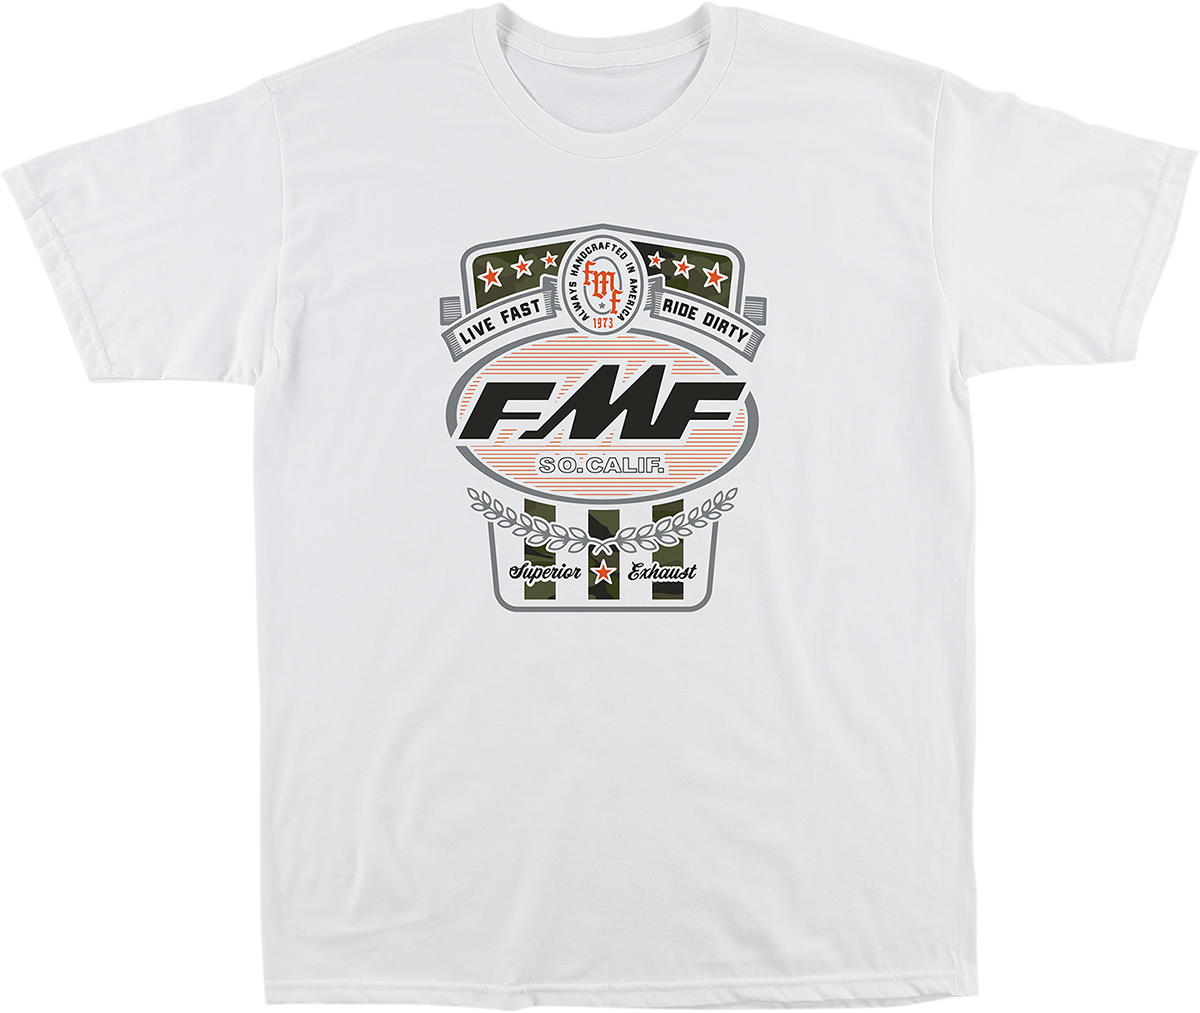 FMF Victory T-Shirt - White - Small FA21118910WHSM 3030-21302